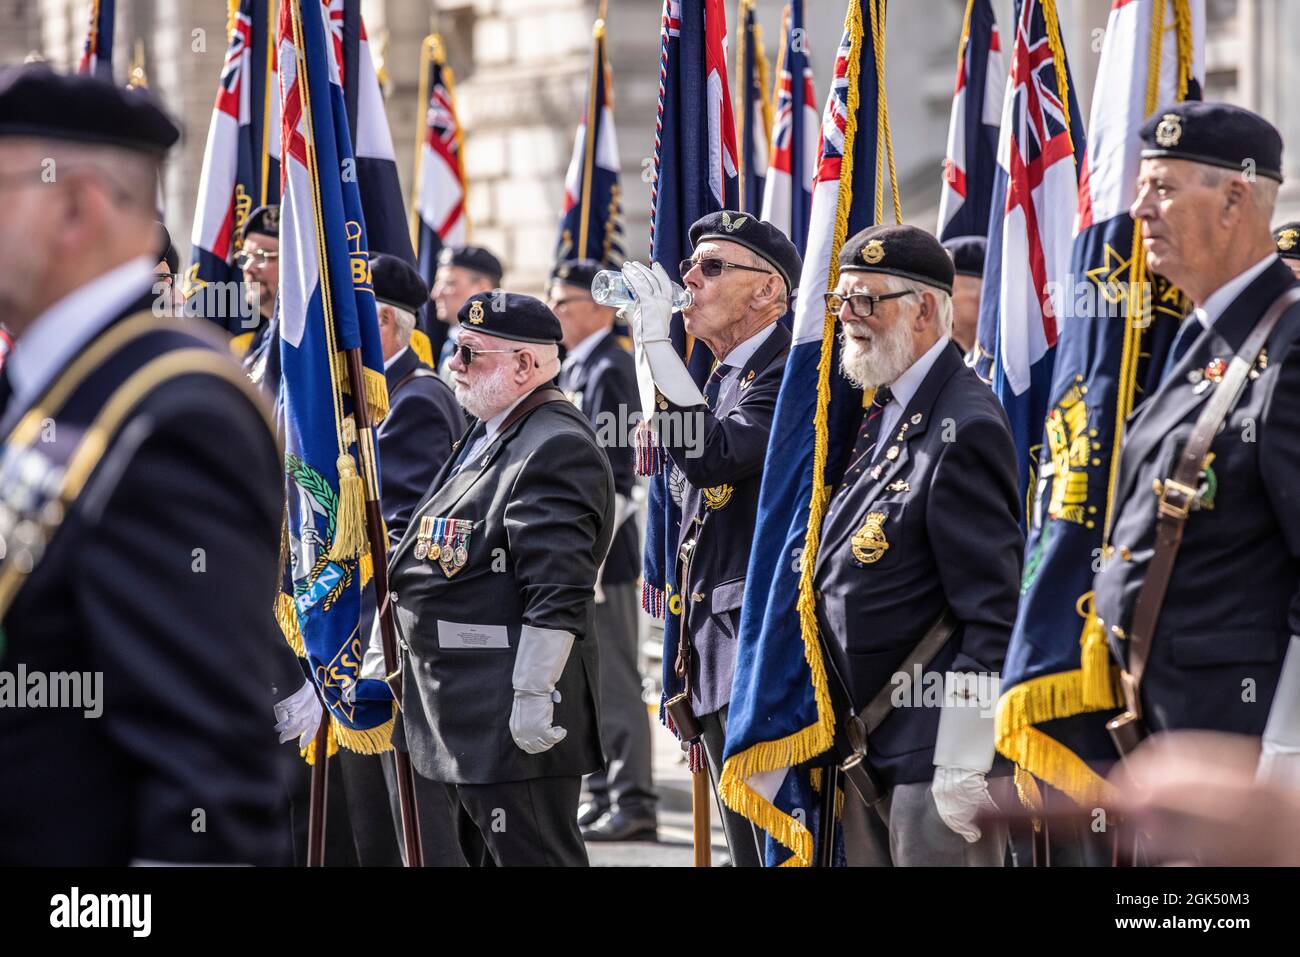 PHOTO:JEFF GILBERT 12th September 2021. Whitehall, London, UK ROYAL NAVY VETERANS MARCH FOR FALLEN COMRADES AT THE CENOTAPH IN WHITEHALL. This was the Stock Photo